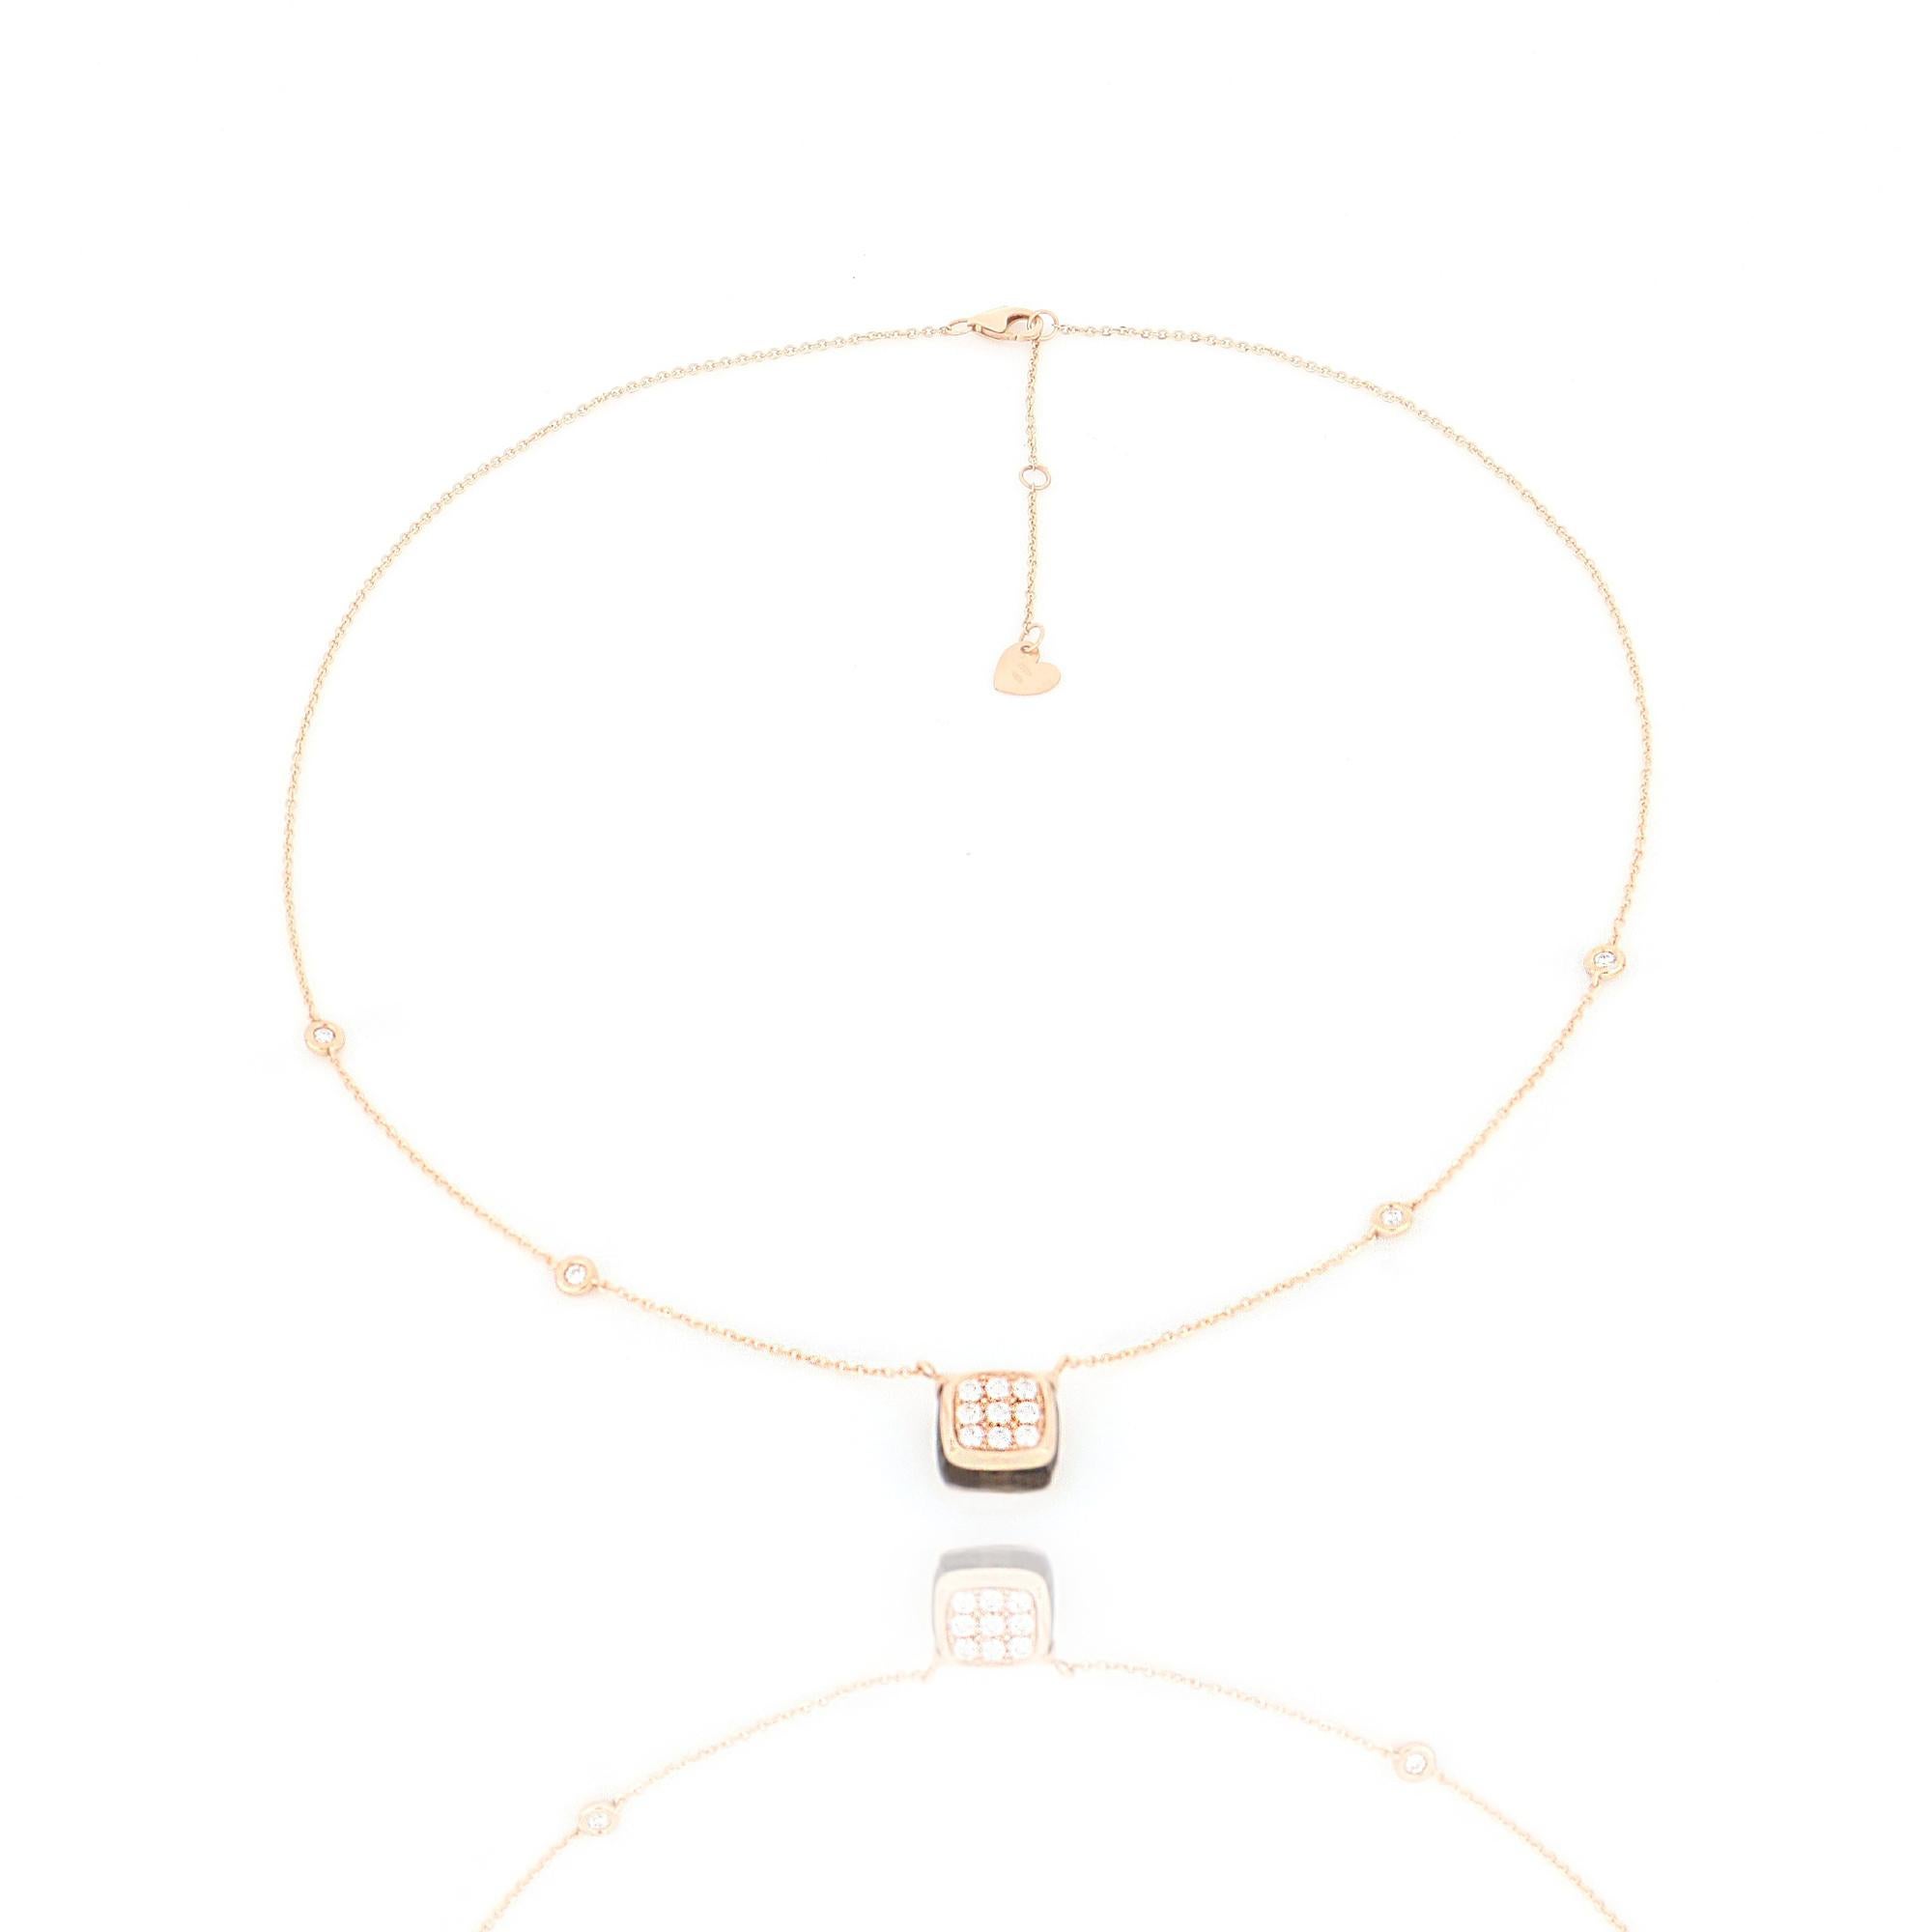 A smoky quartz candy make the base for the diamonds on its top. Notes of light and amber for a playful and never boring design.

Necklace length 43 cm with extension at 45 cm and 48 cm, rose gold diamond chain, cushion cut smoky quartz 5.10 ct with